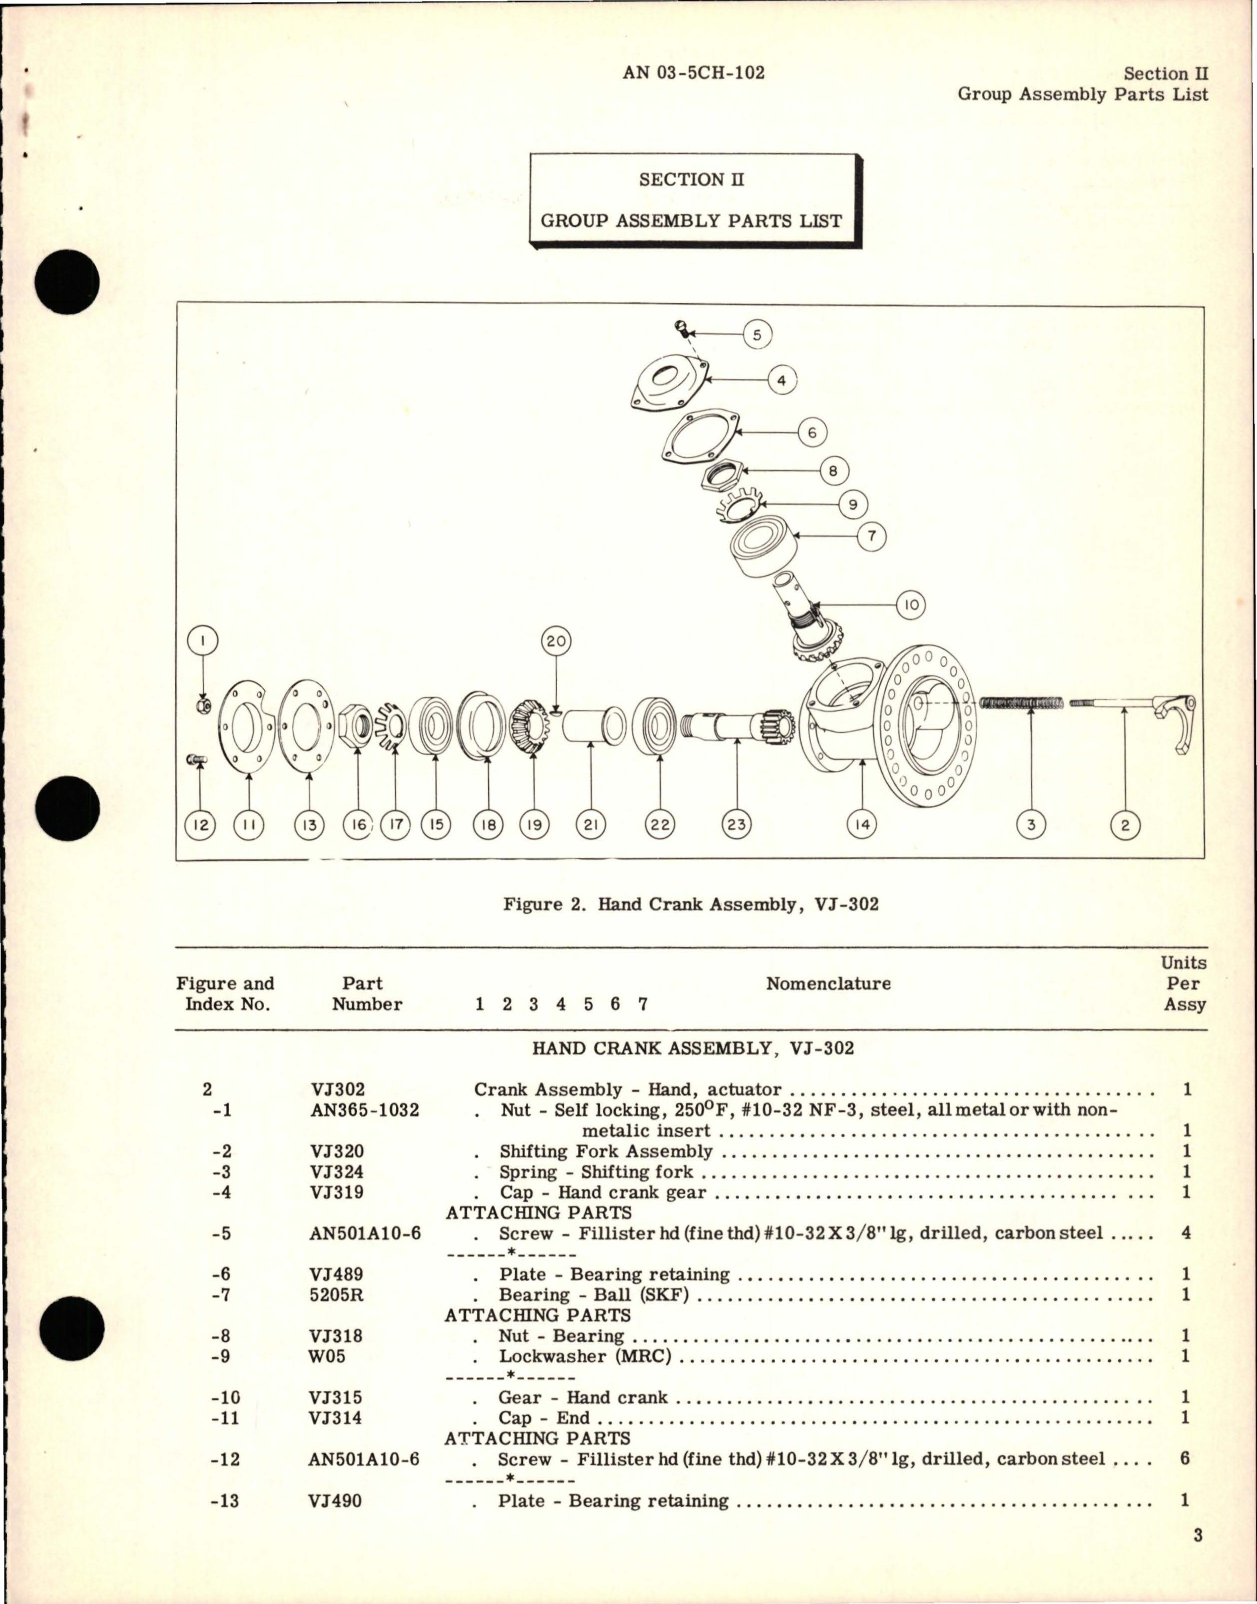 Sample page 5 from AirCorps Library document: Parts Catalog for Main Landing Gear Actuator - Part VJ-550 